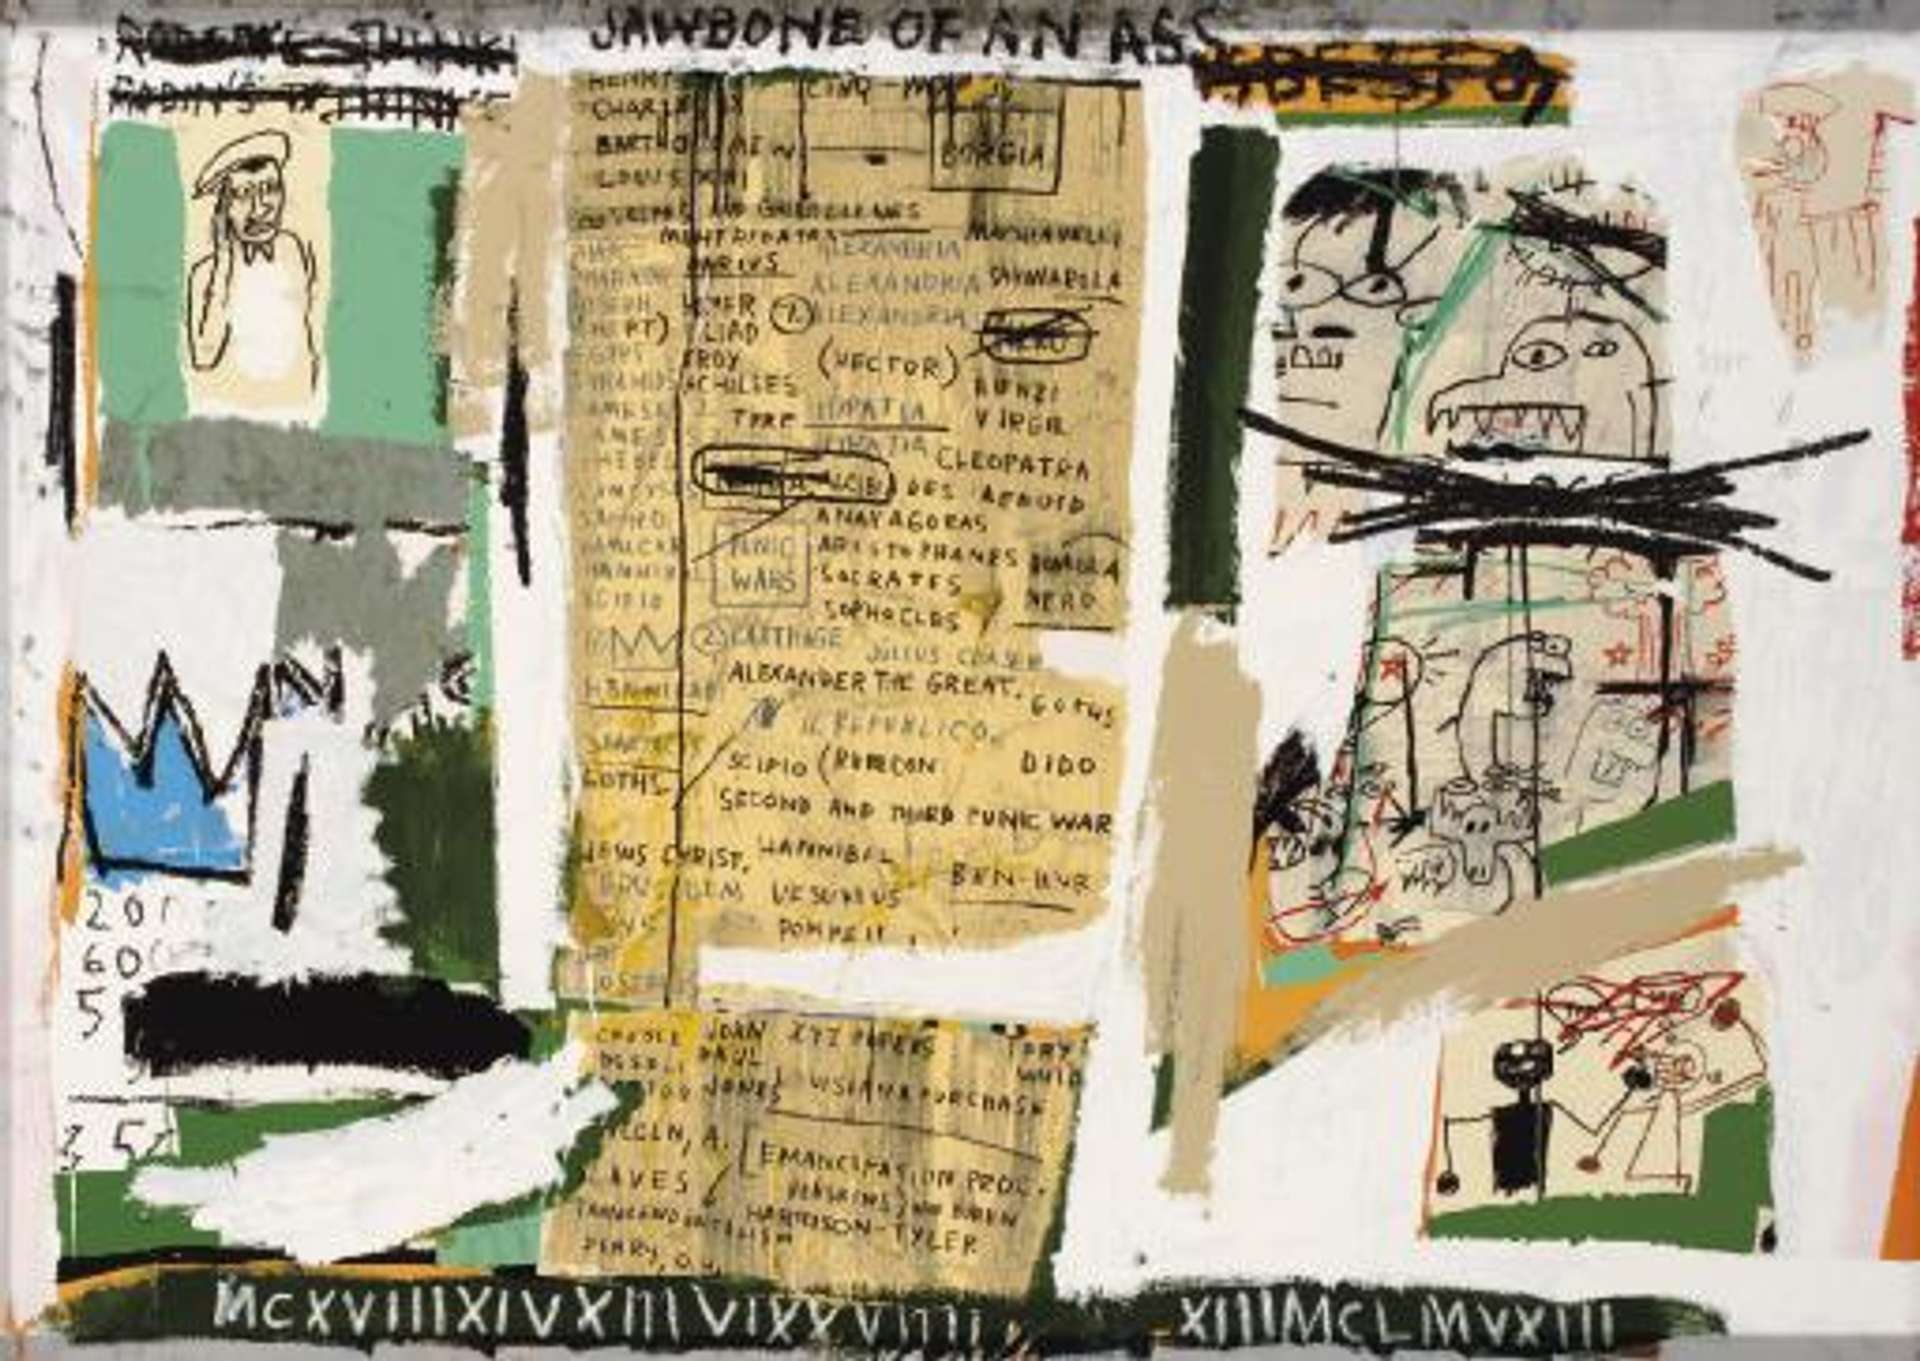 Jean-Michel Basquiat’s Jawbone Of An Ass. A Neo-Expressionist screenprint of a variety of texts, symbols, and animated figures. 